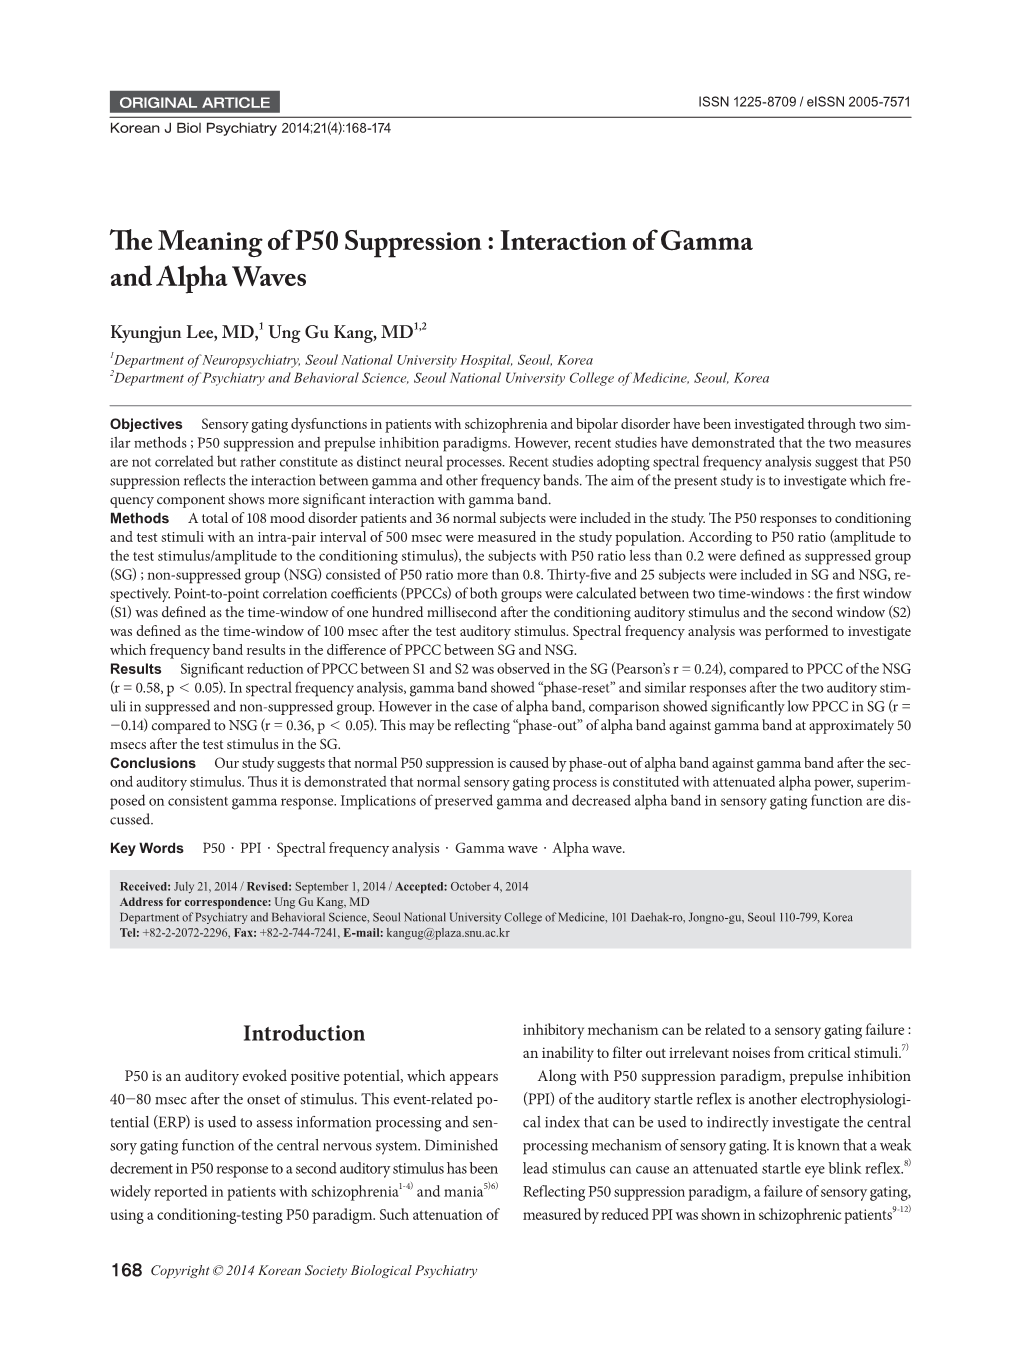 The Meaning of P50 Suppression : Interaction of Gamma and Alpha Waves